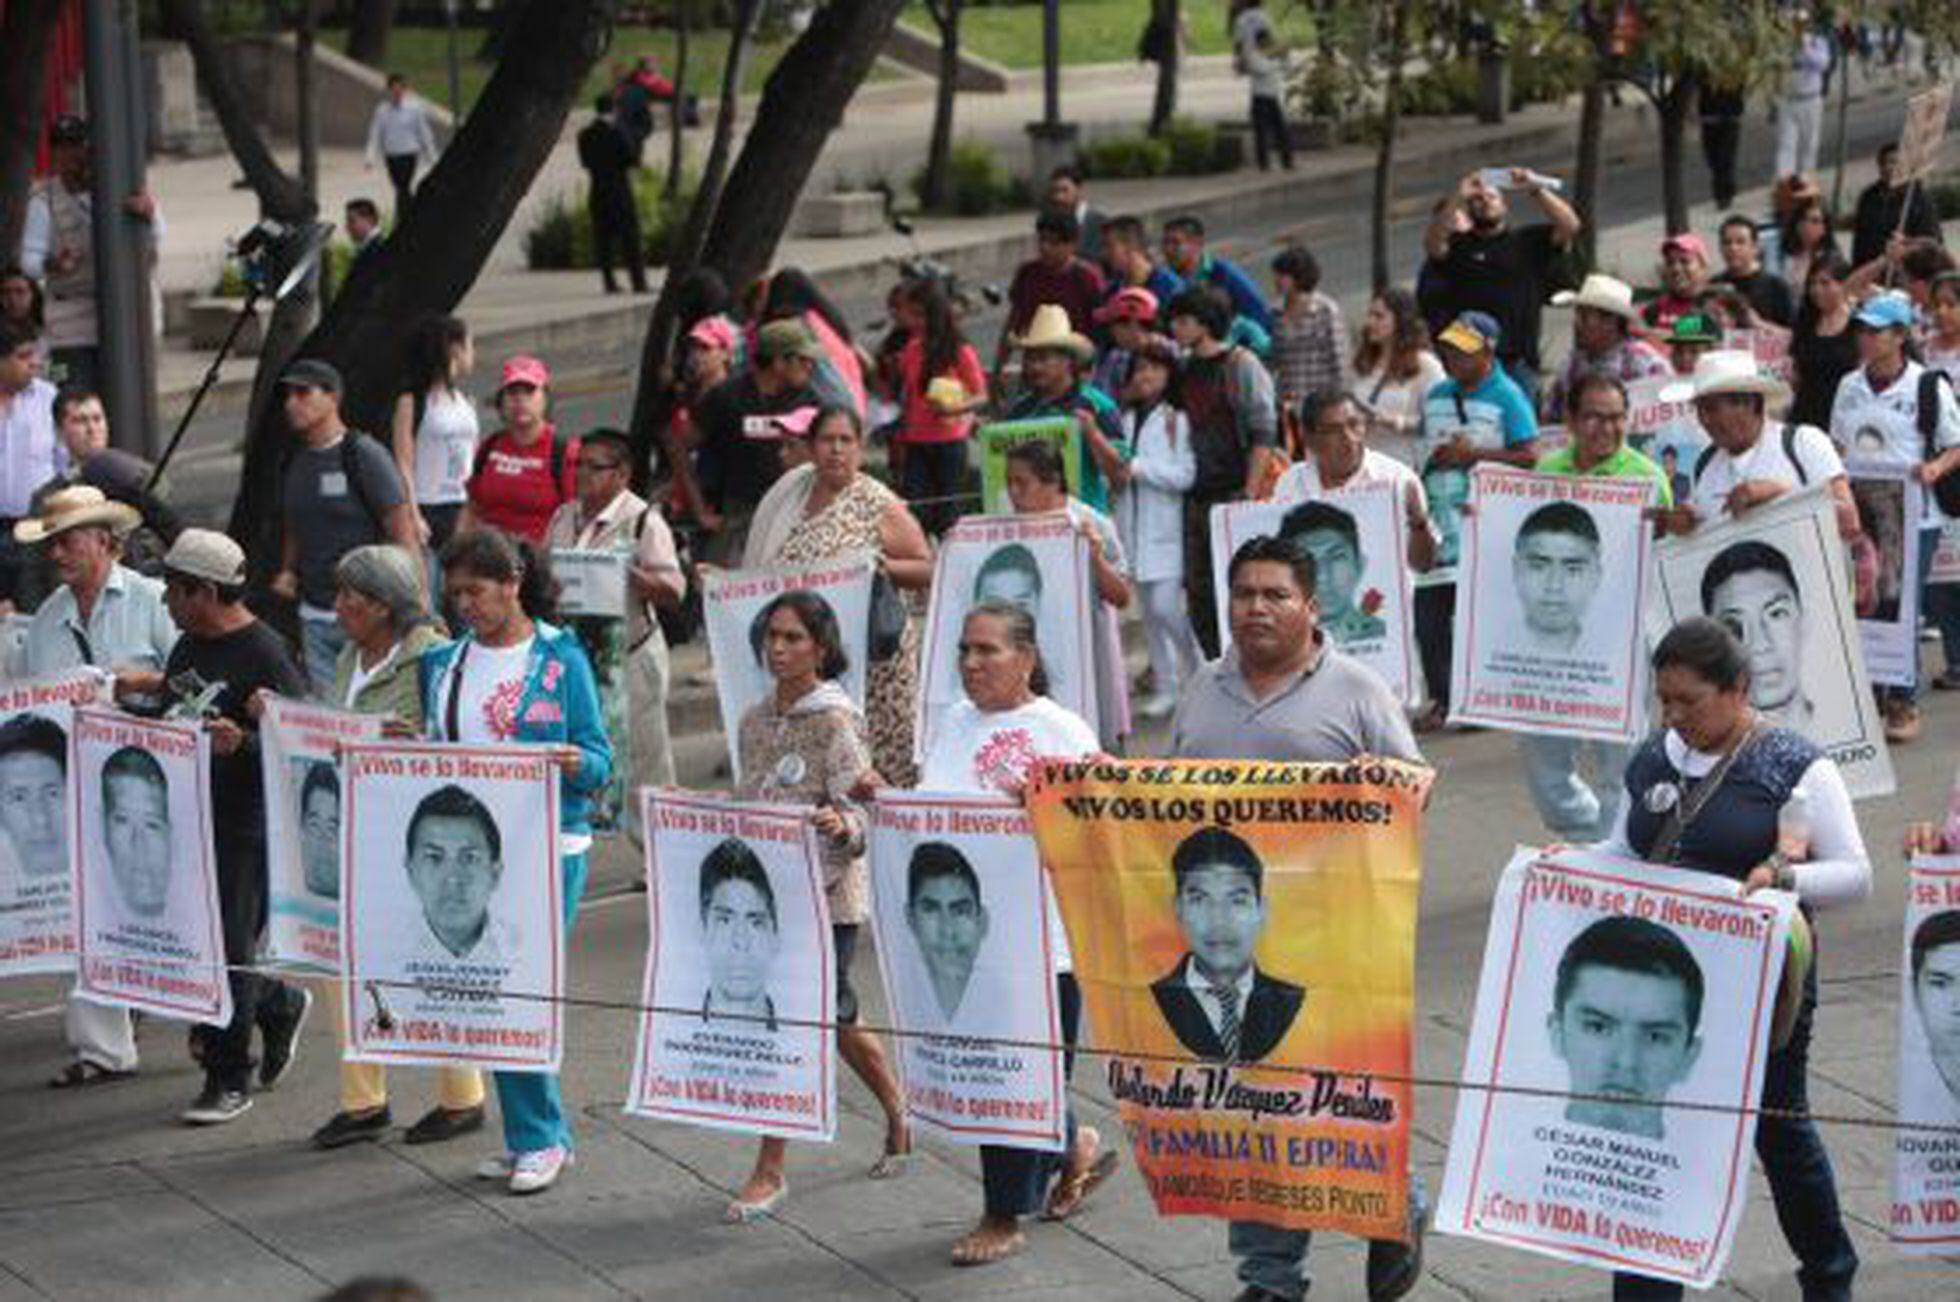 Mexico missing persons cases More than 24,000 people are missing in